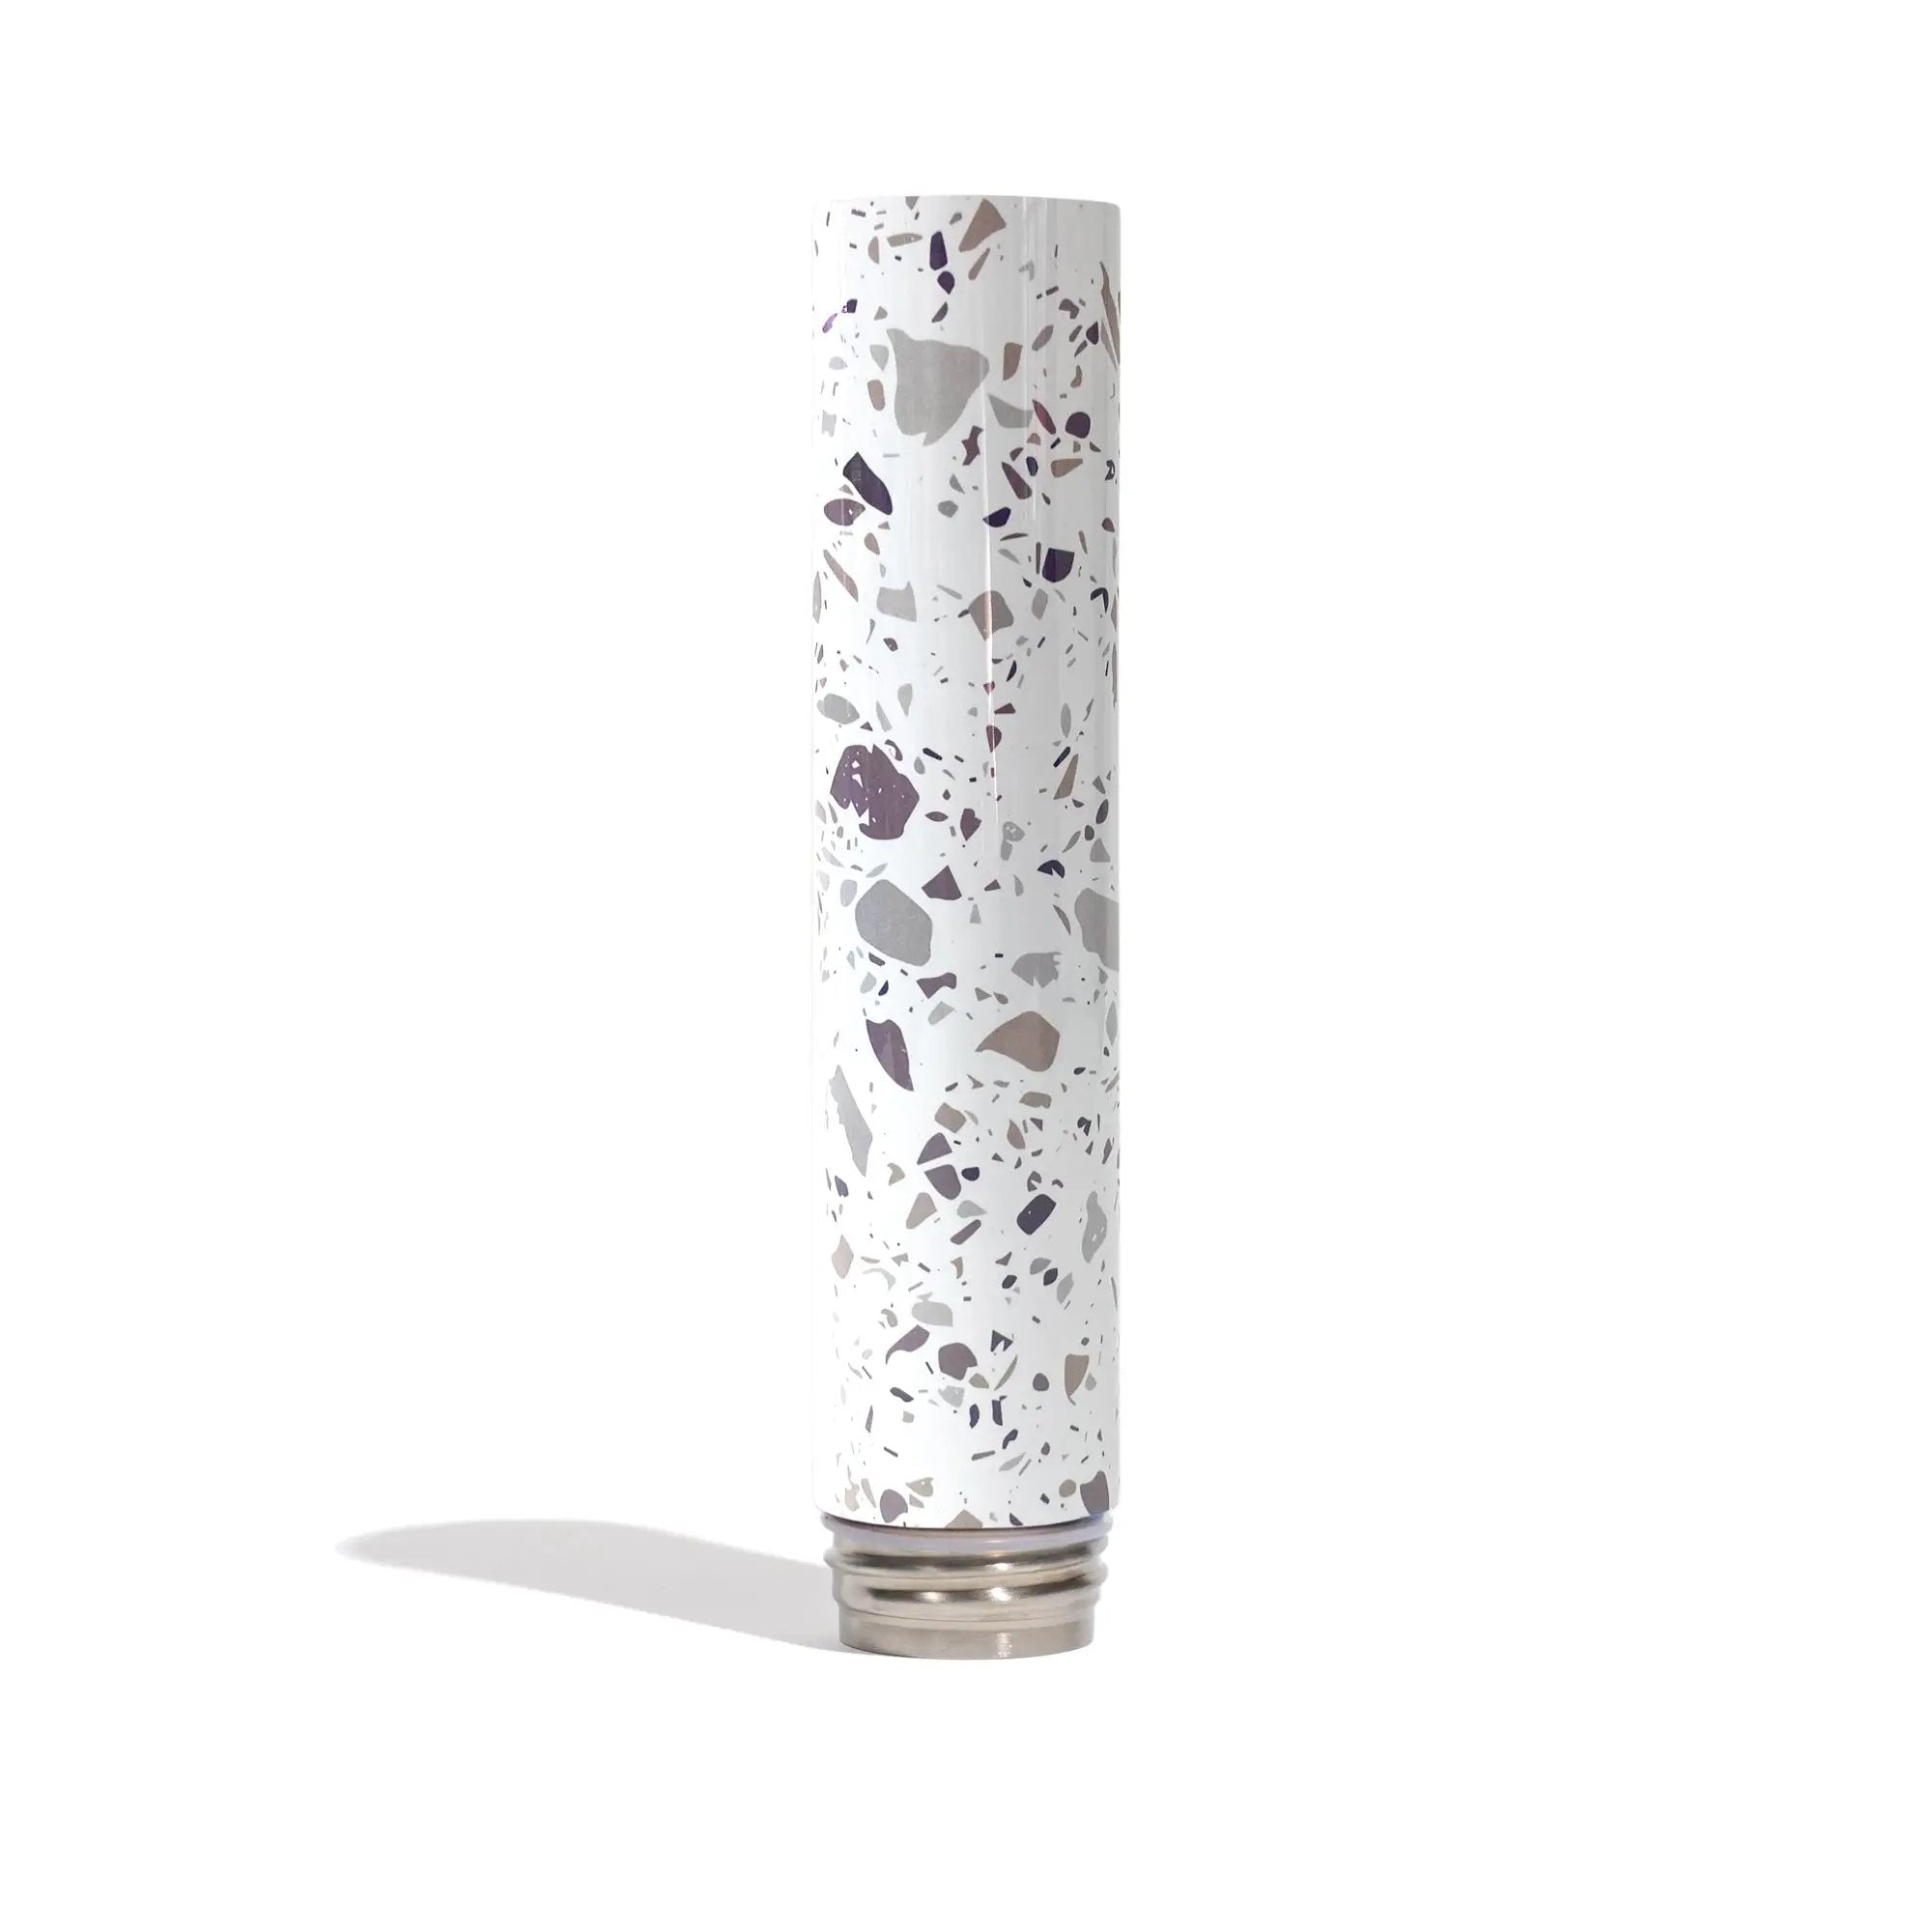 Gloss White & Terrazzo Combo by Chill Steel Pipes